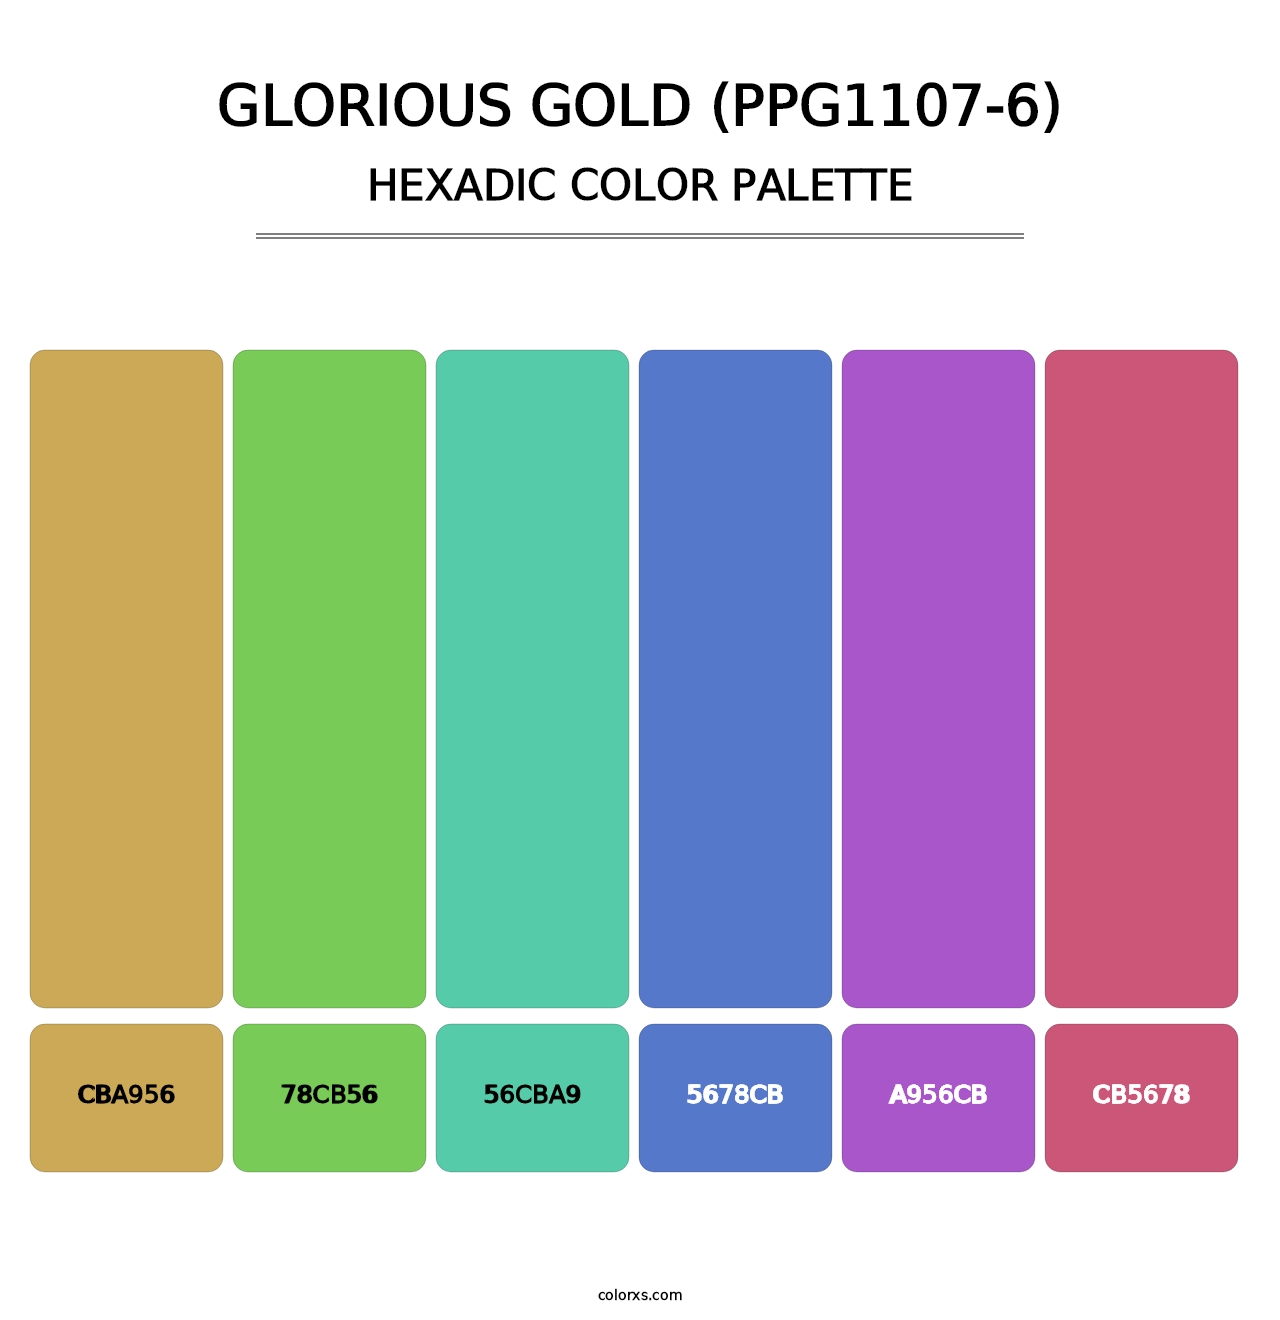 Glorious Gold (PPG1107-6) - Hexadic Color Palette